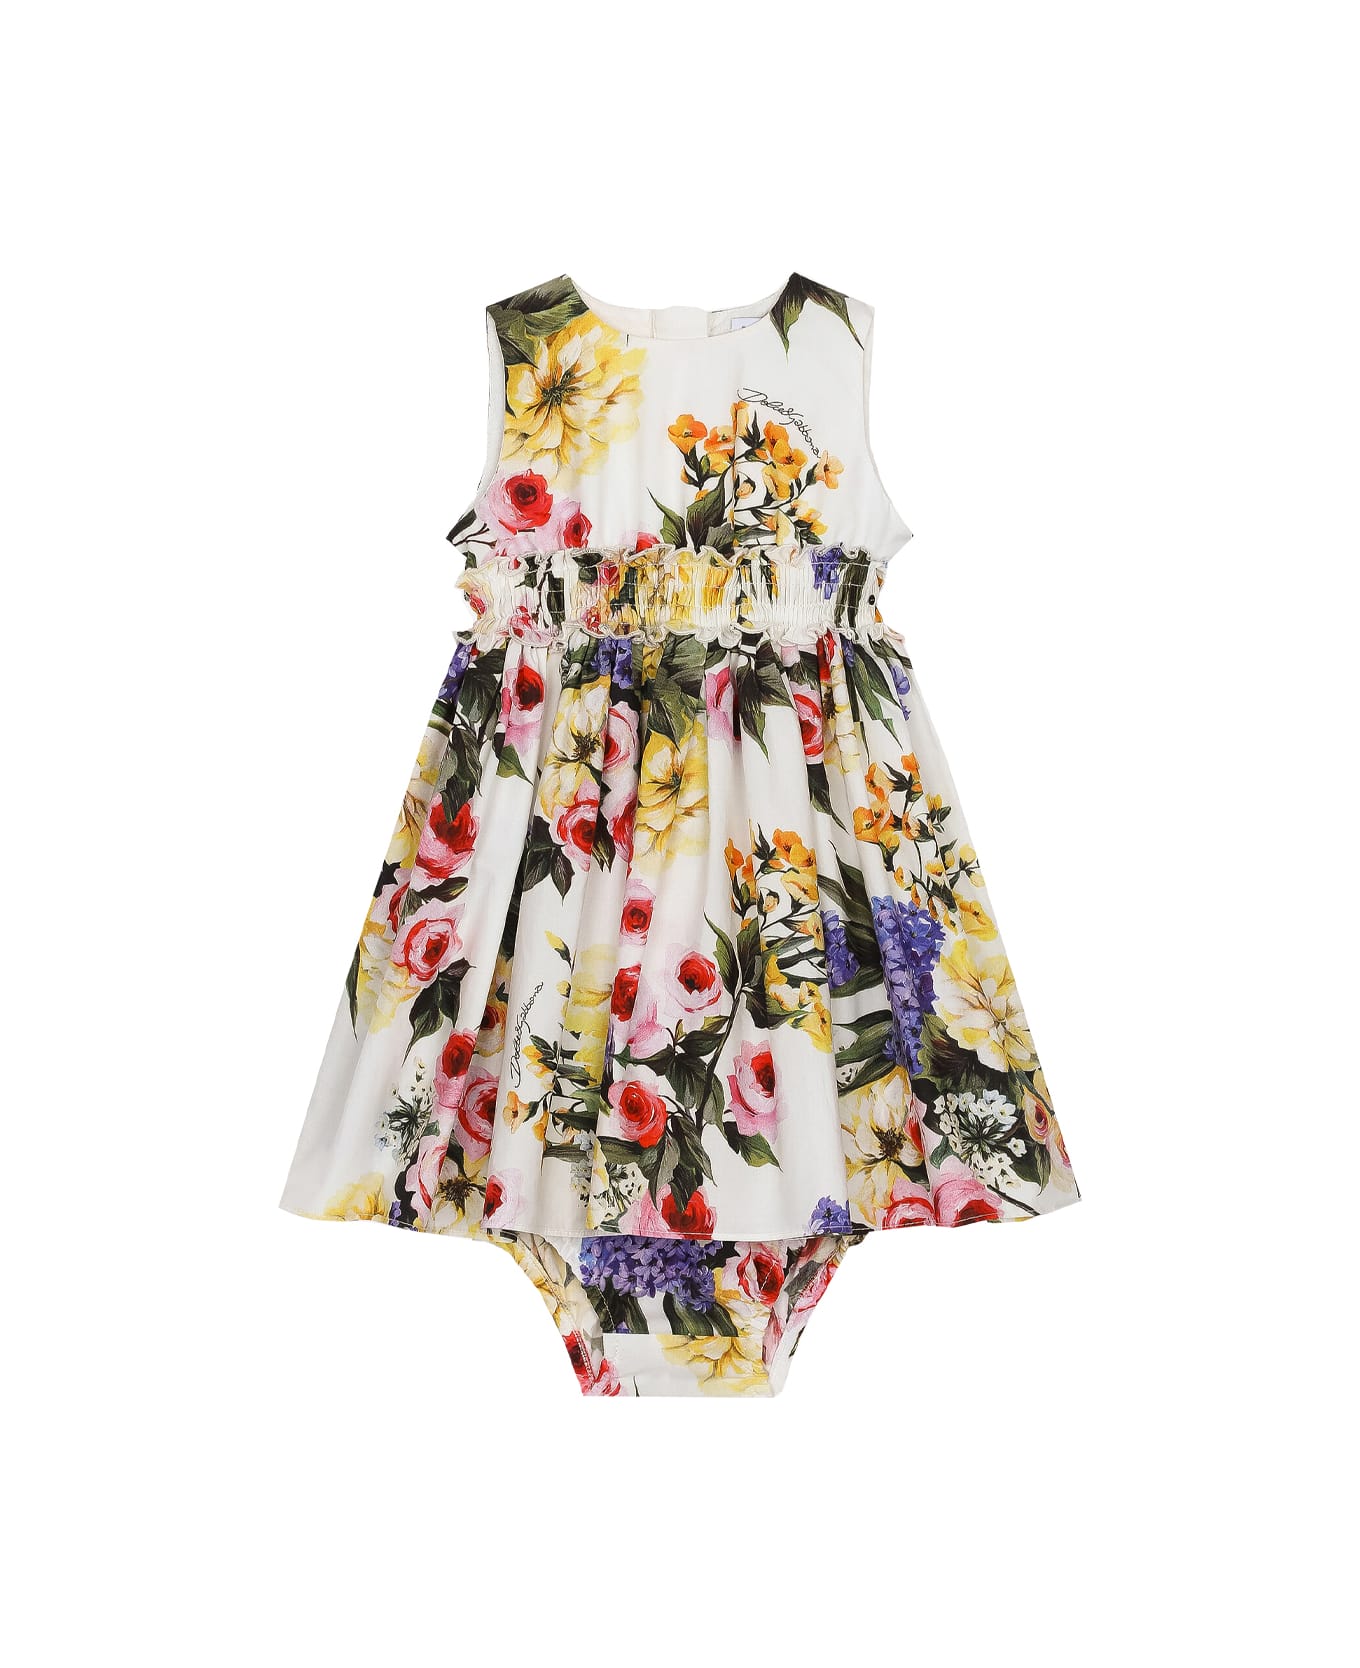 Dolce taille & Gabbana Dress With Garden Print Poplin Cover - Multicolor